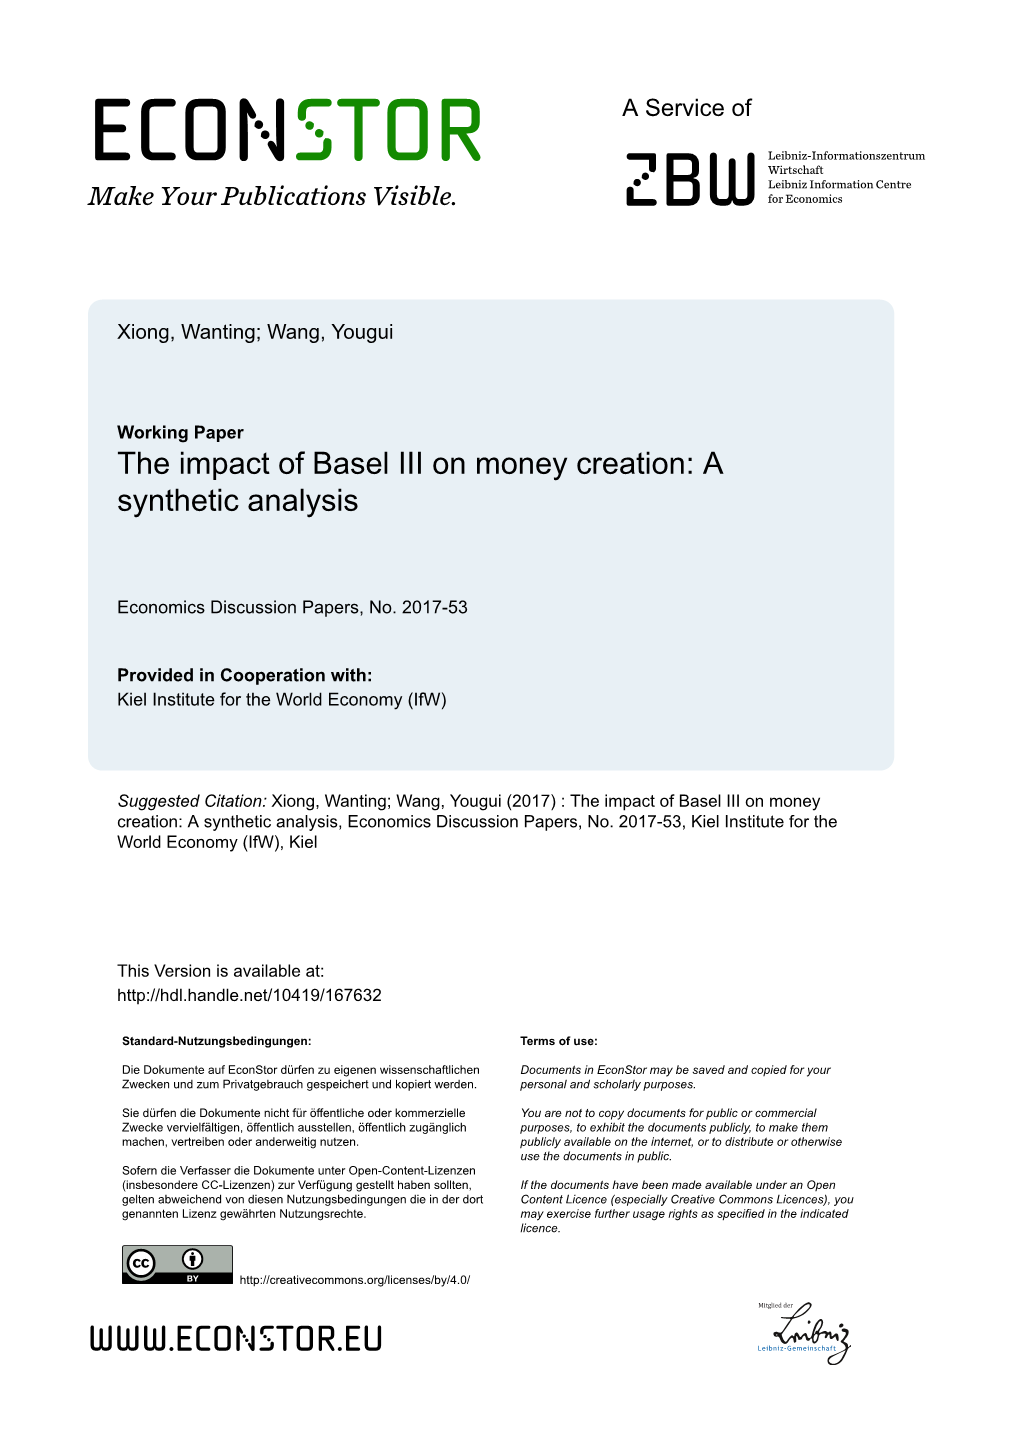 The Impact of Basel III on Money Creation: a Synthetic Analysis